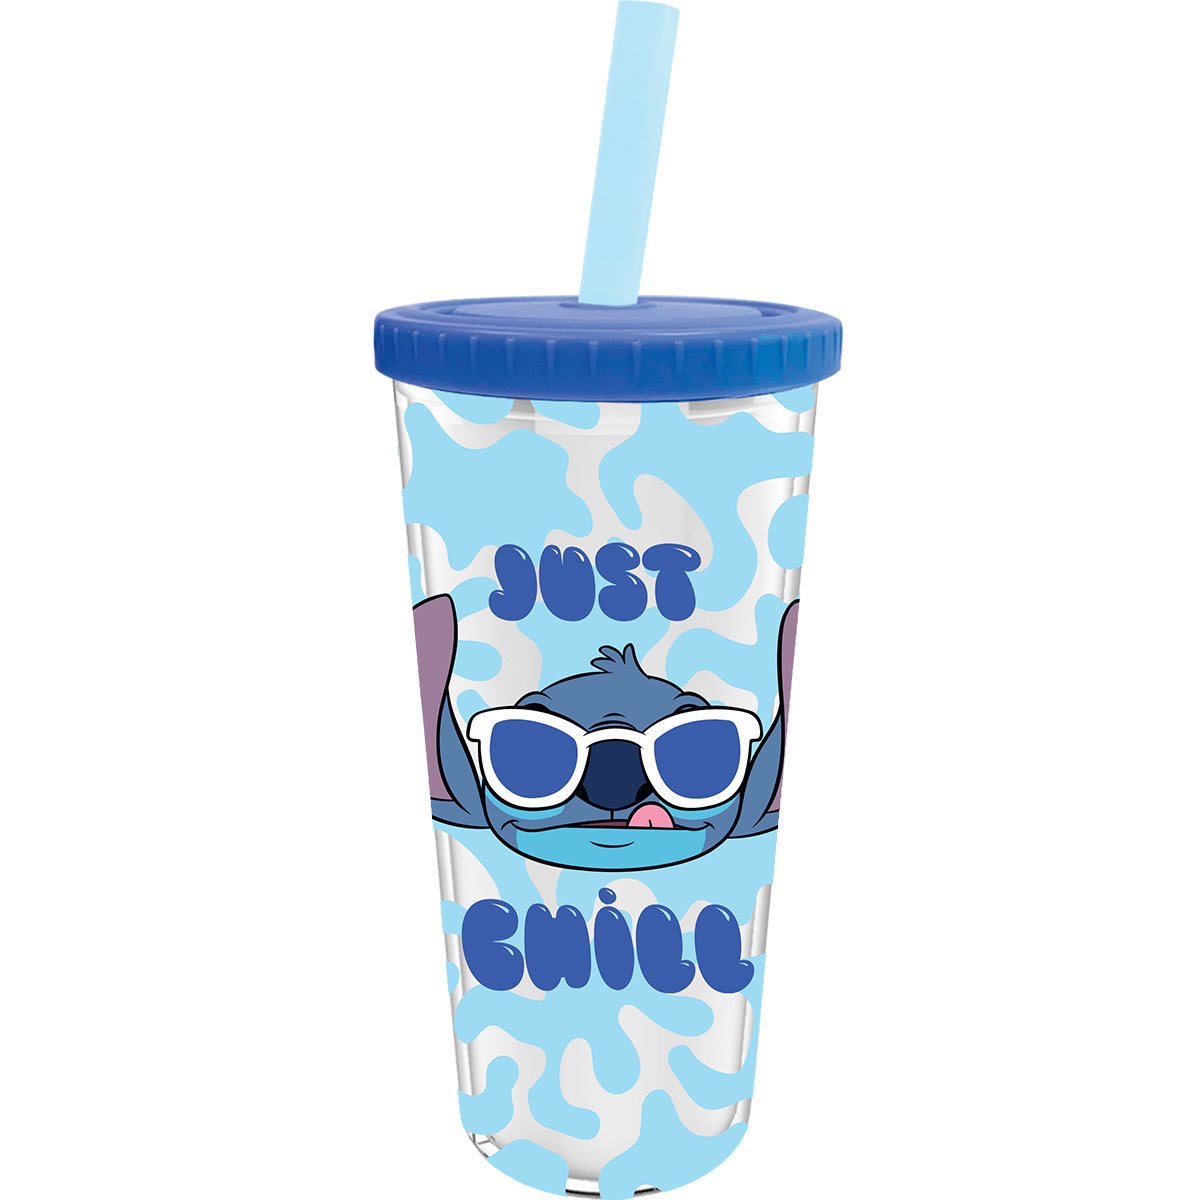 Silver Buffalo Lilo and Stitch Pastel Snack Toss Plastic Boba Tumbler w Lid  and Straw, 24 Ounces, 24…See more Silver Buffalo Lilo and Stitch Pastel